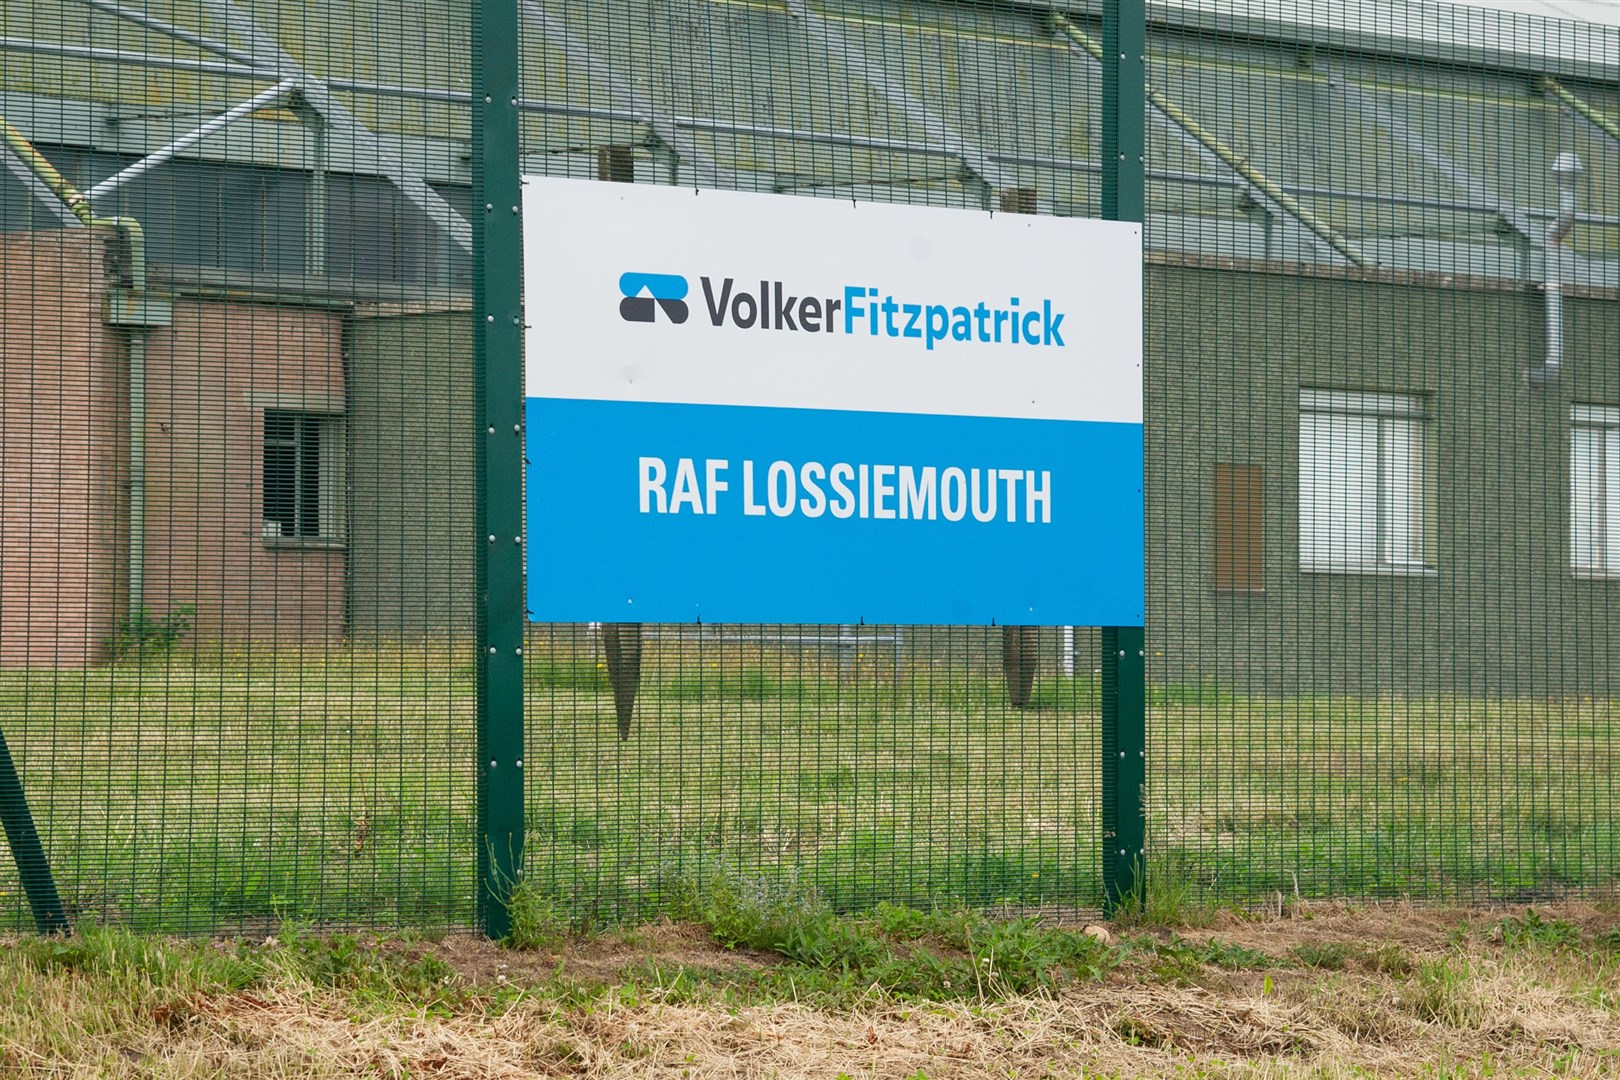 The VolkerFitzpatrick runway site at RAF Lossiemouth. Picture: Daniel Forsyth.